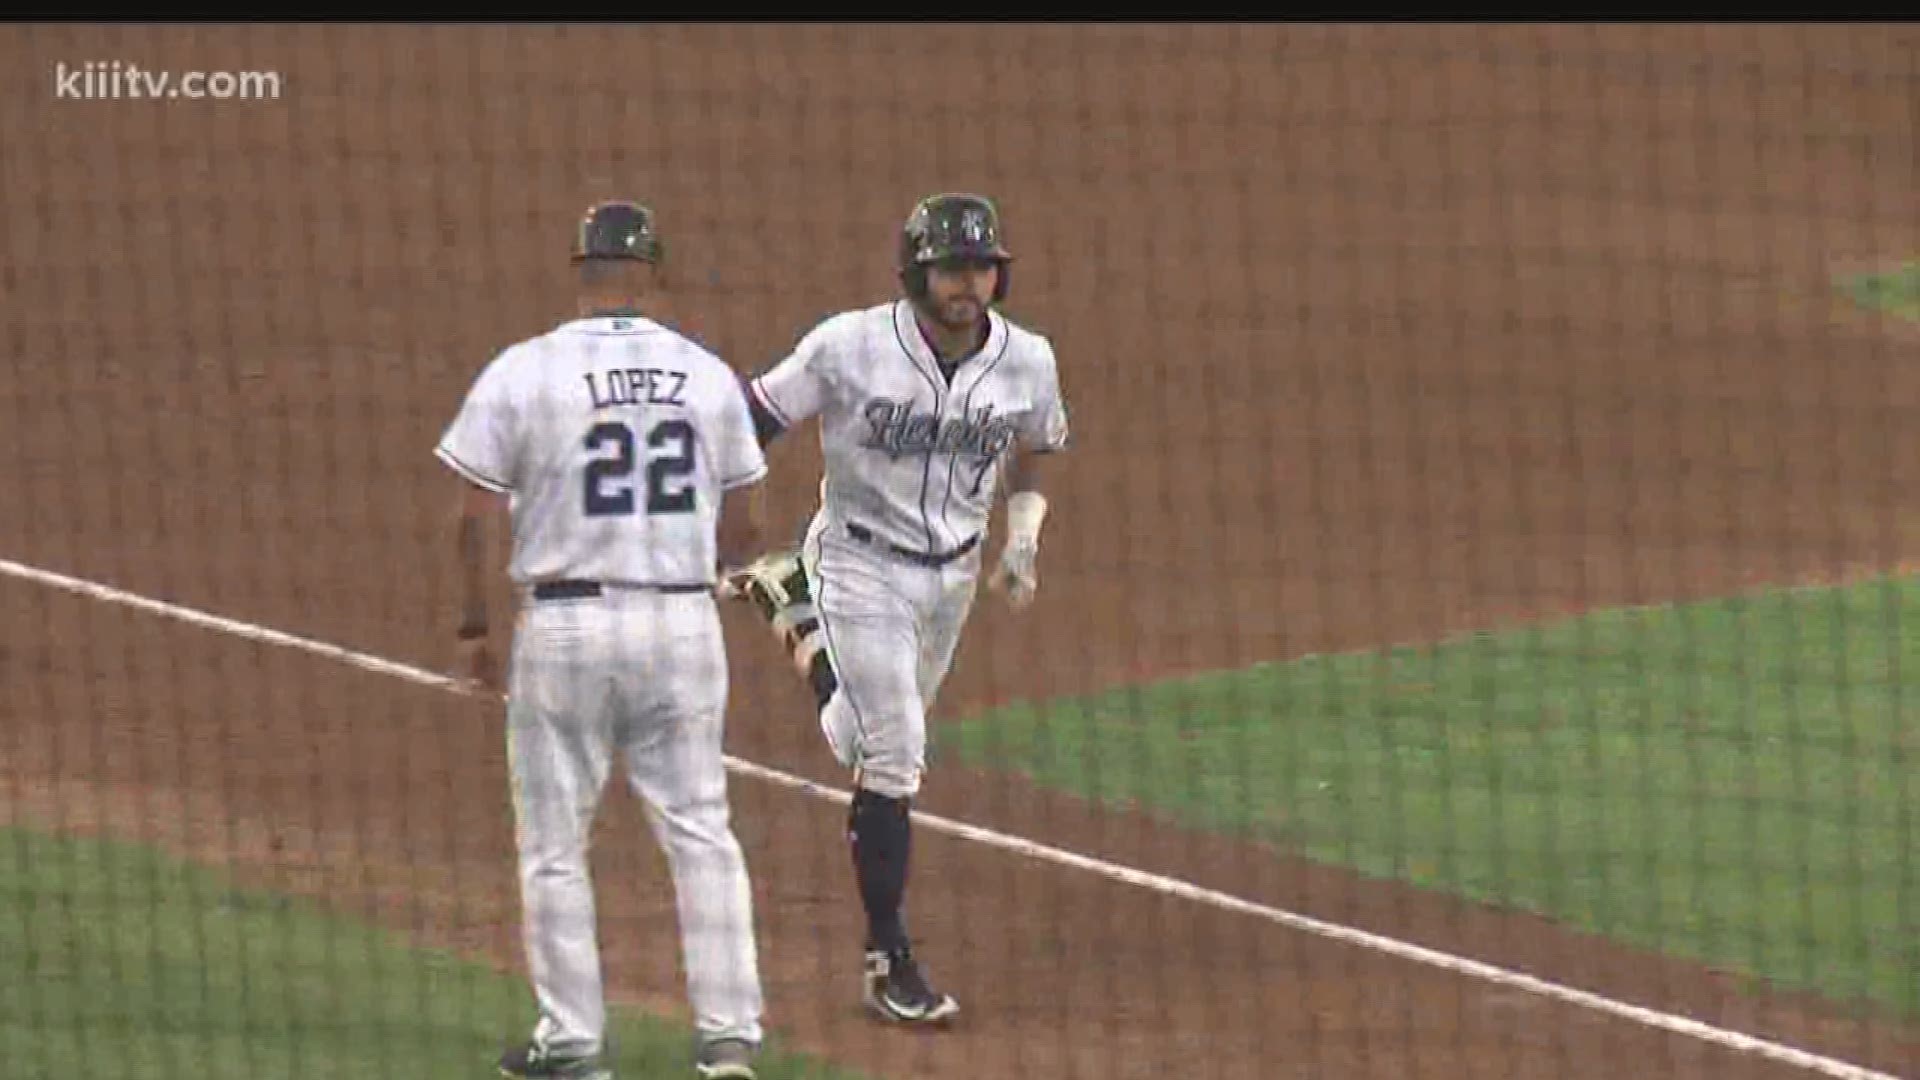 The Corpus Christi Hooks smacked four home runs en route to a 6-4 win over the Missions. 